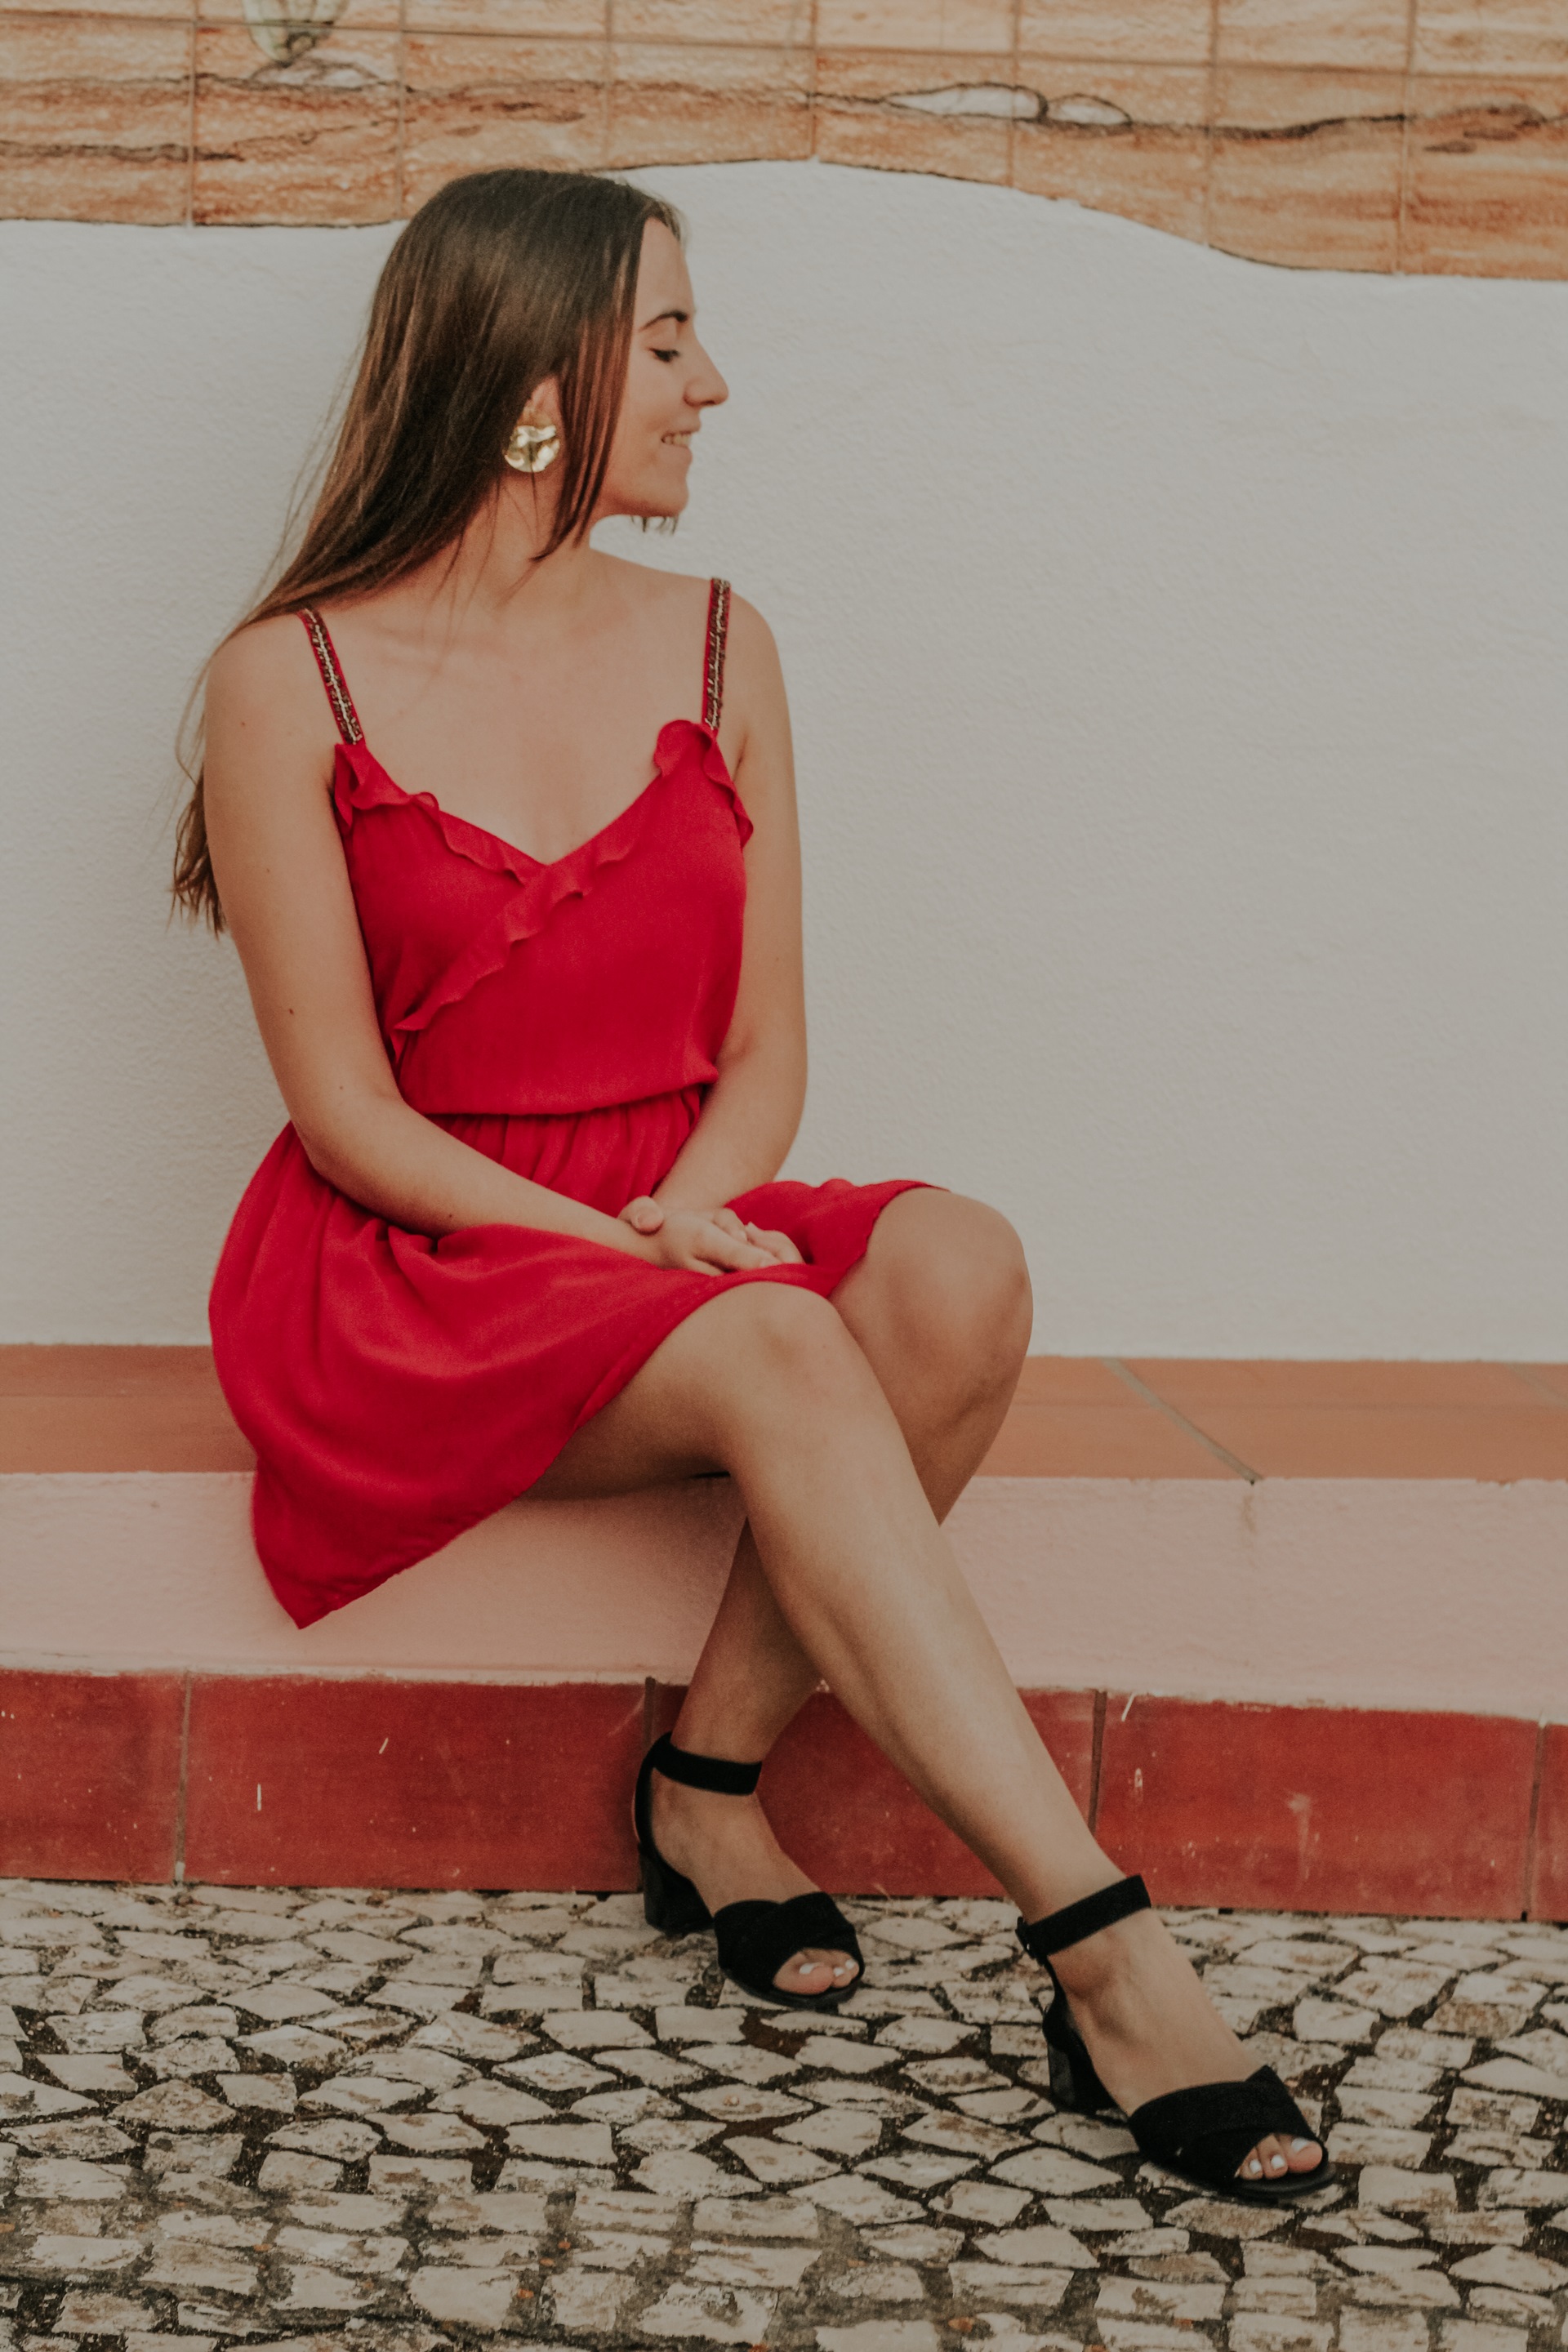 zara_red_dress_outfit_rockport_sandals